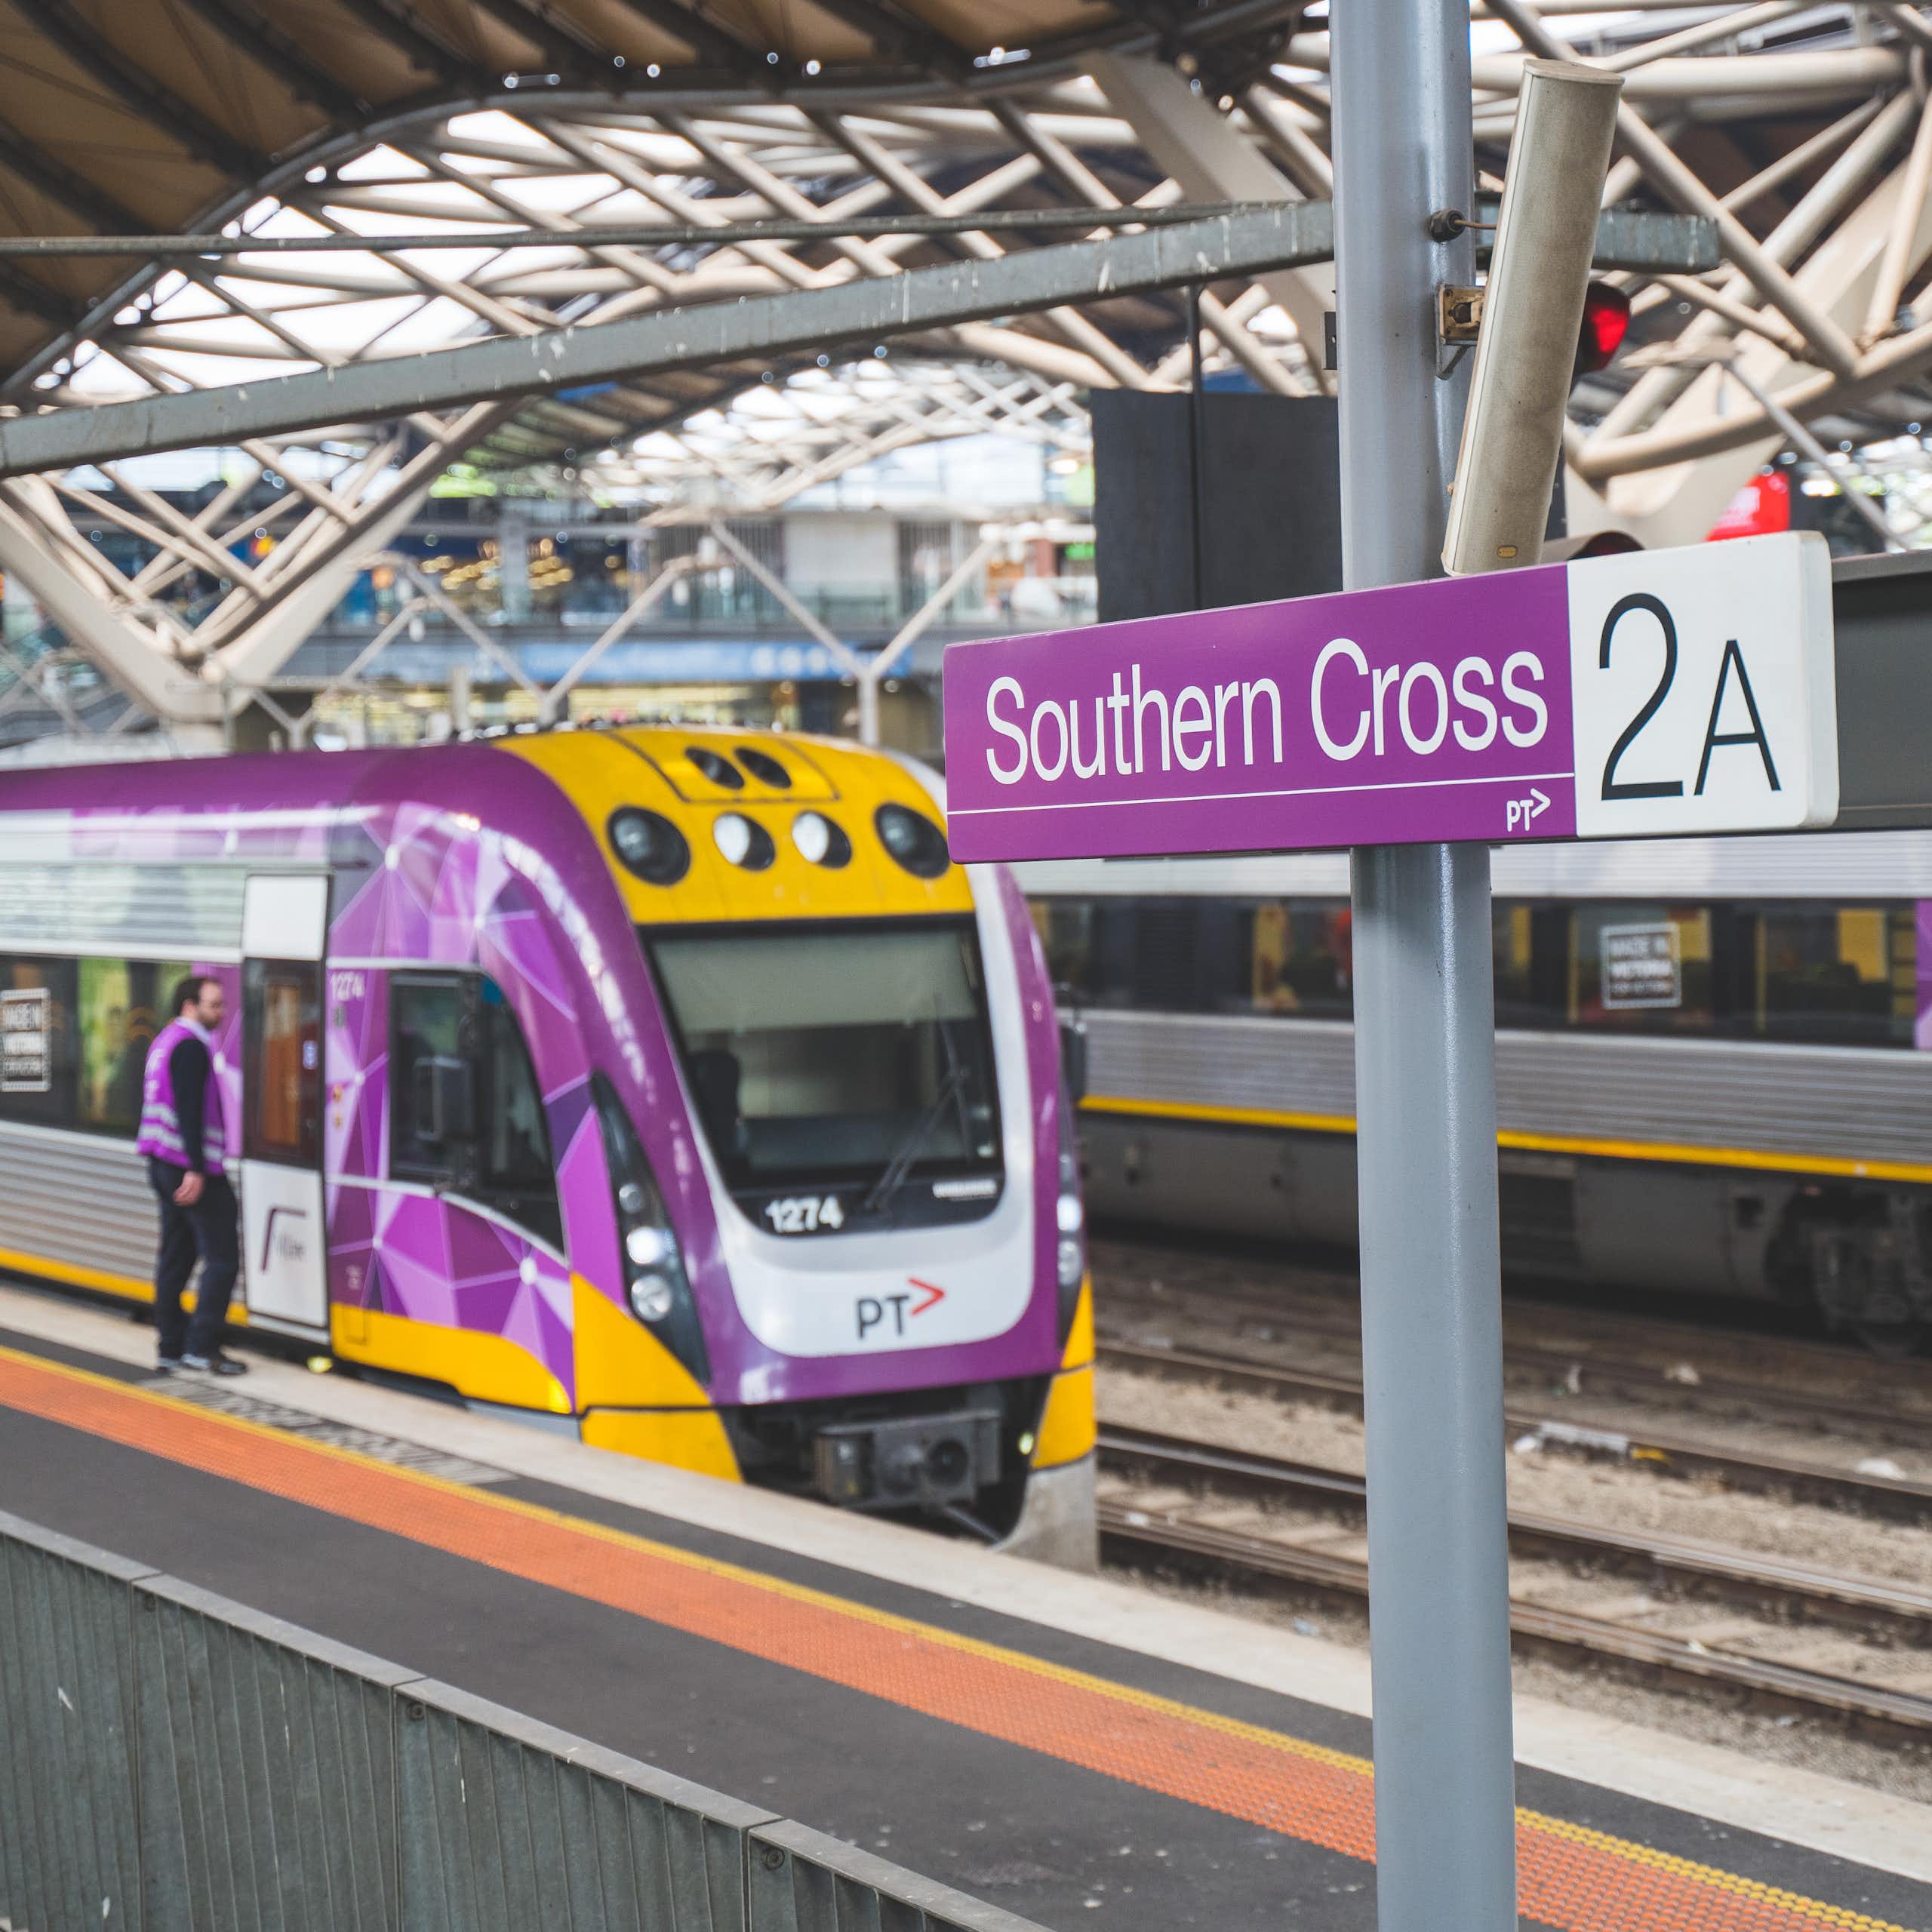 Two V/Line trains at platforms under the roof of Southern Cross Station